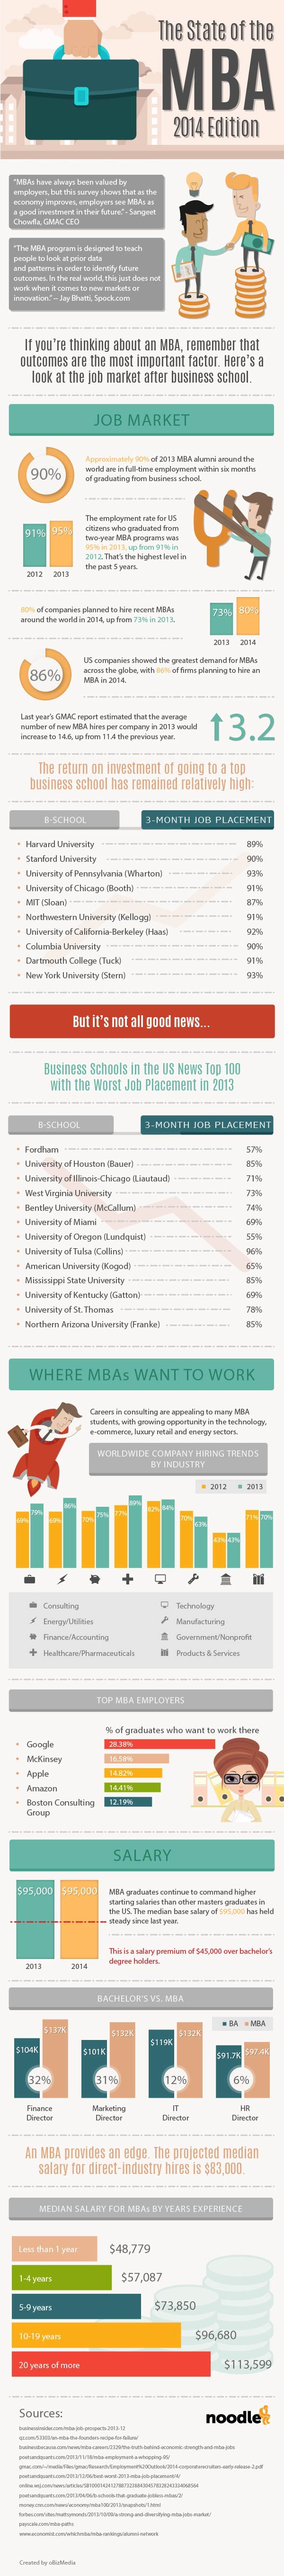 Permalink to: "The State Of The MBA Degree"